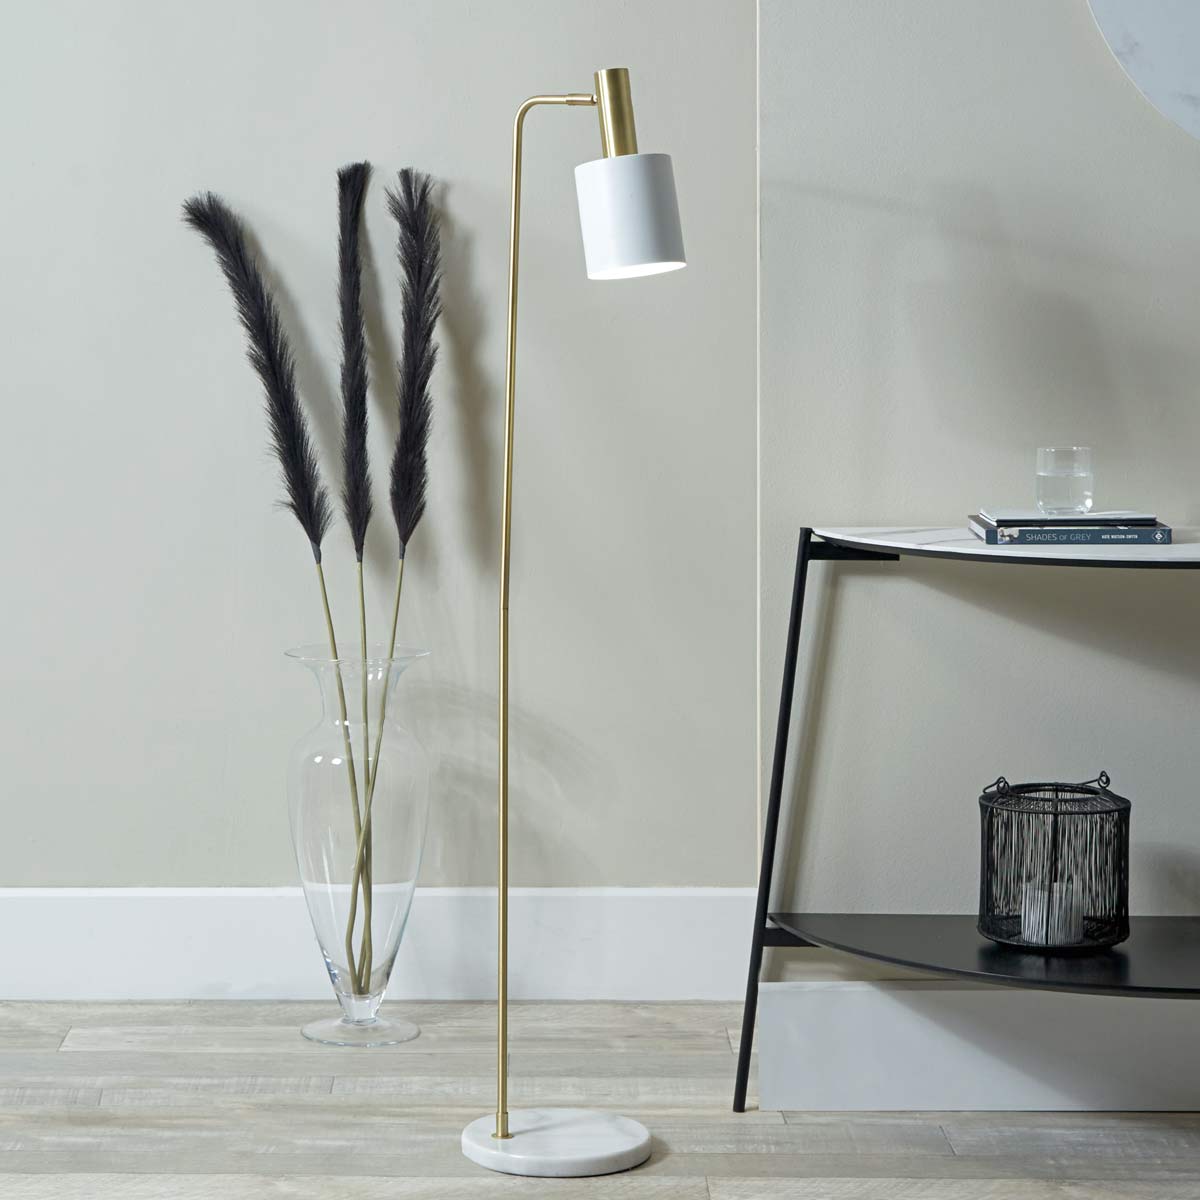 Biba home reading light is a floor lamp with a marble base